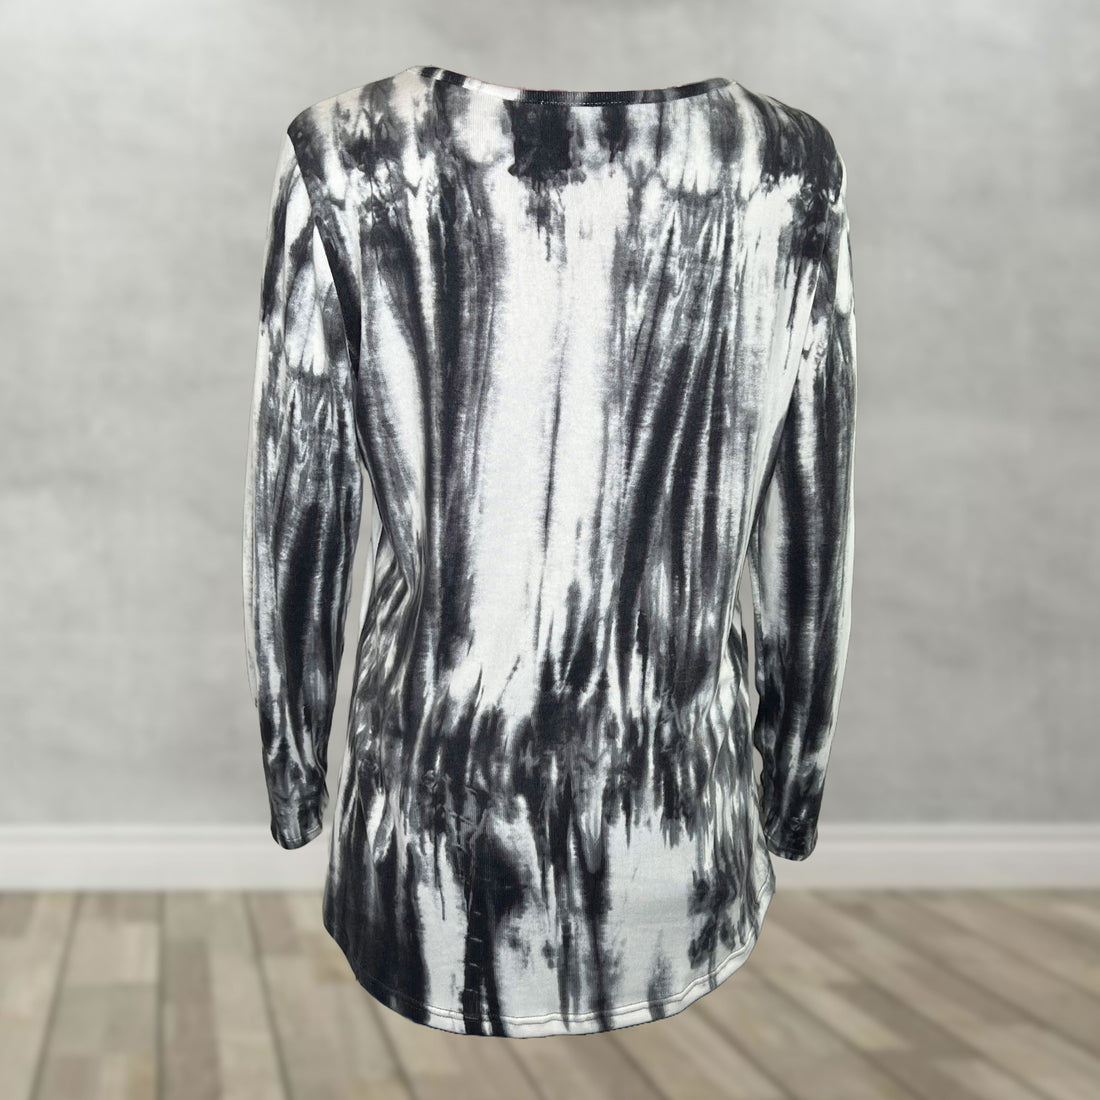 Dramatic Black and Ivory Lace-Up V-Neck Top - Long Sleeve Tie-Dye Statement